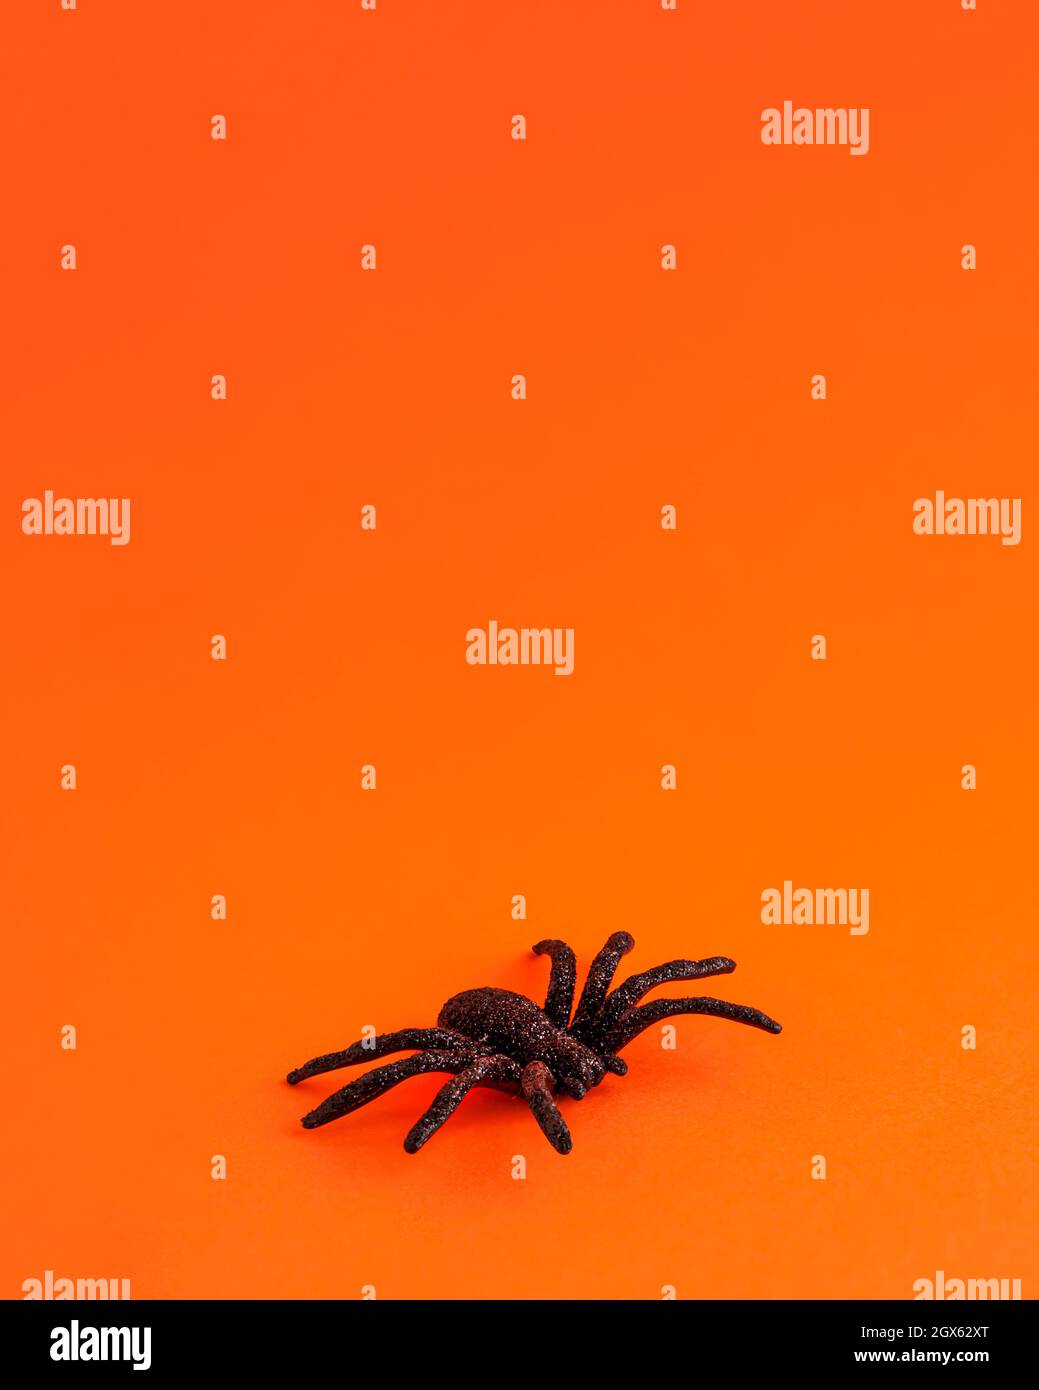 One small black horror spider on orange backdrop with copy space. Halloween decoration spooky background concept for holidays. Stock Photo